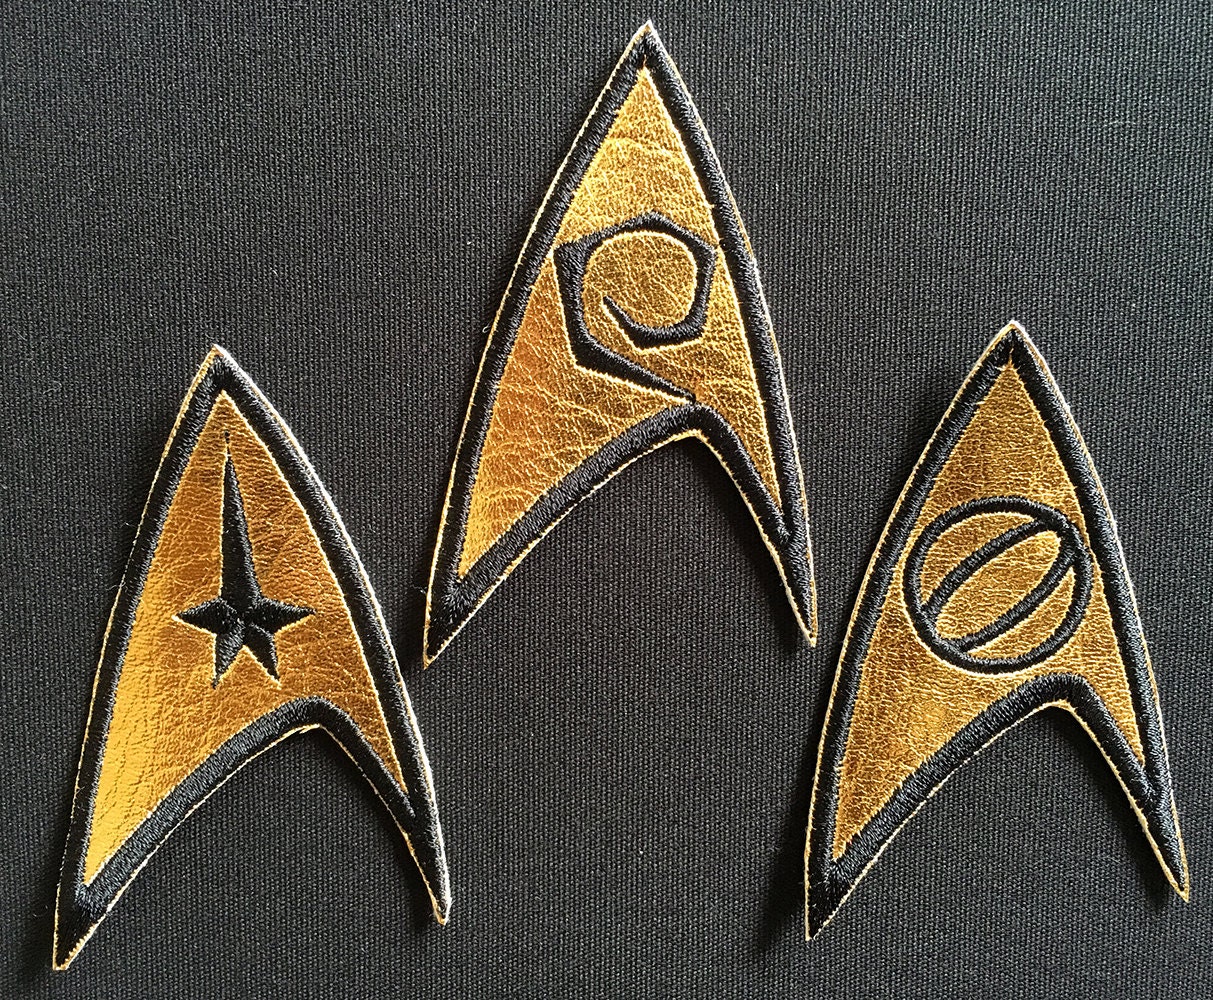 STPA-5006 ENGINEERING Star Trek Classic Uniform  Insignia 3" Embroidered Patch 